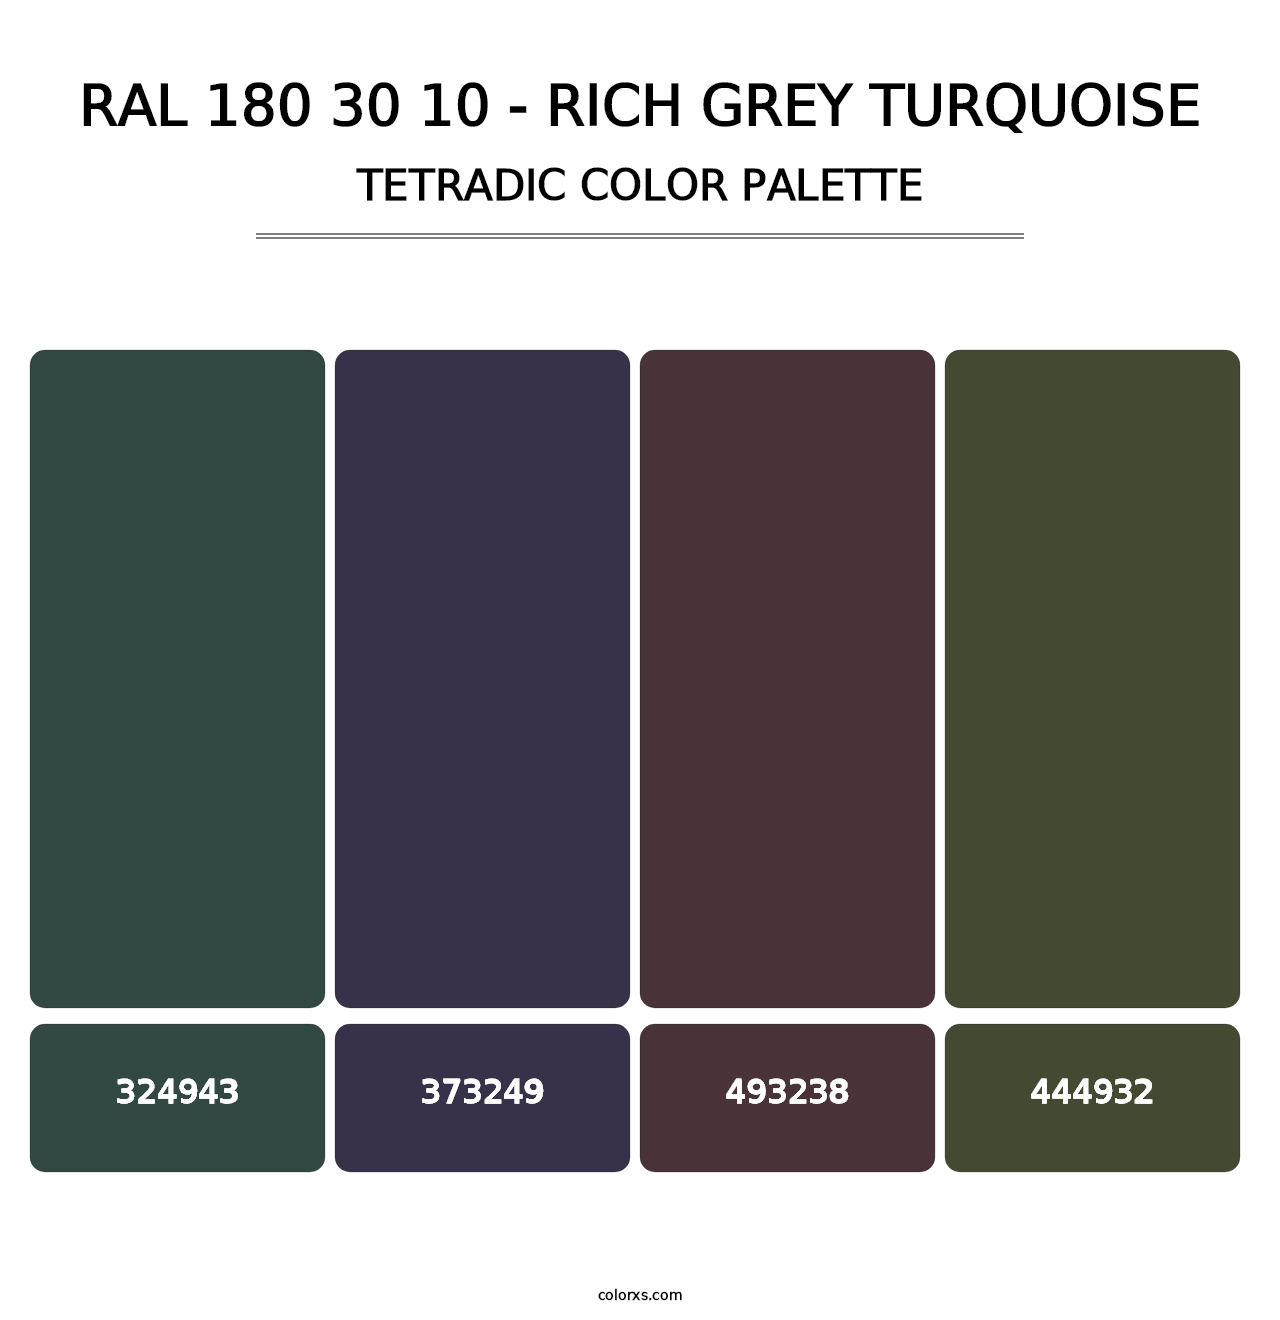 RAL 180 30 10 - Rich Grey Turquoise - Tetradic Color Palette